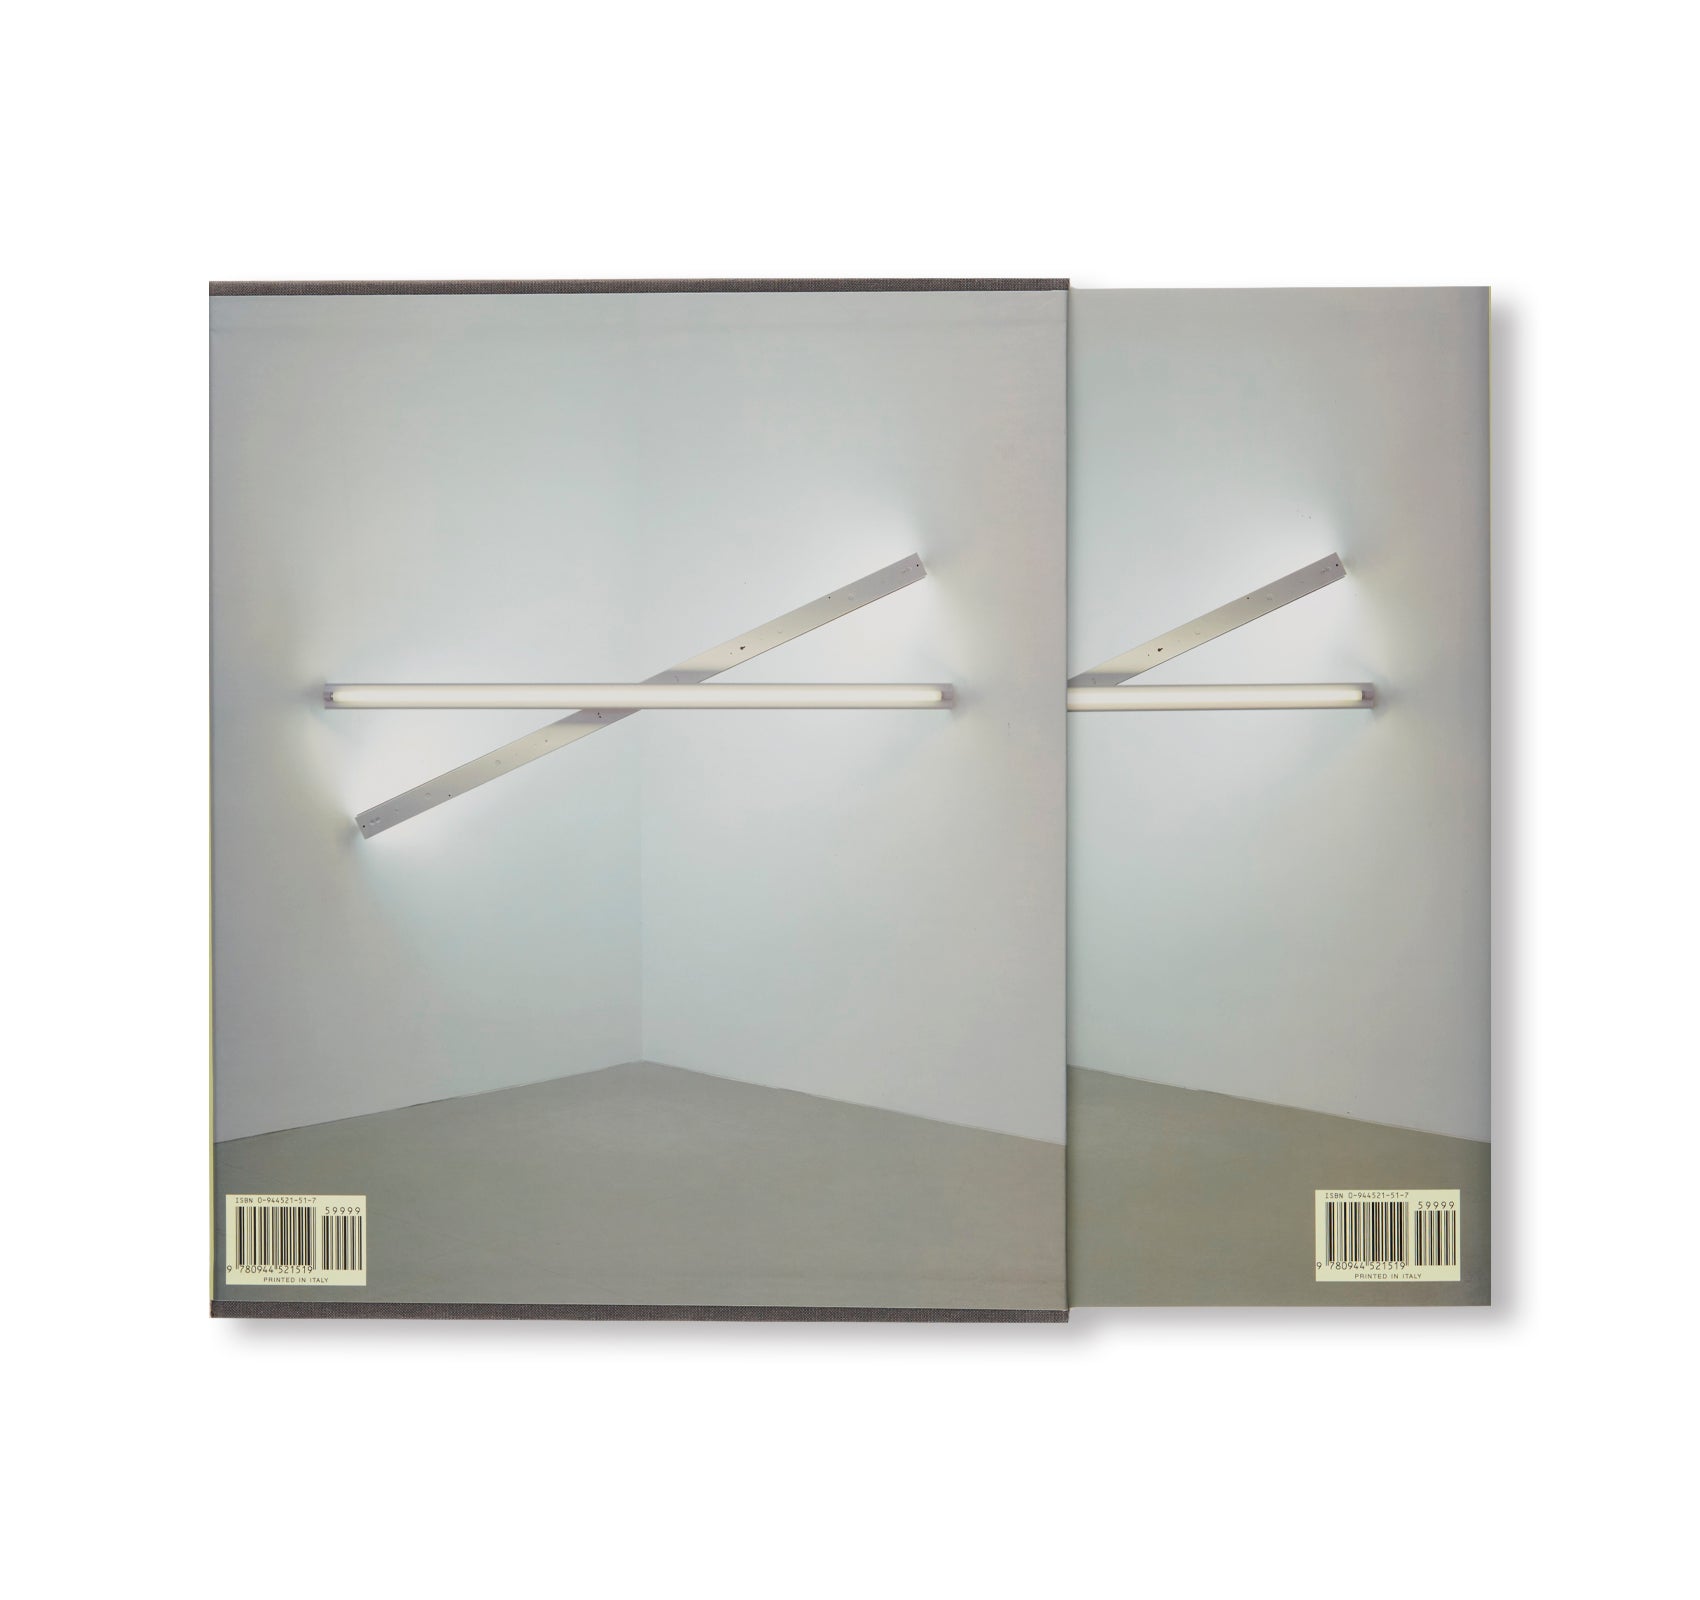 THE COMPLETE LIGHTS, 1961–1996 by Dan Flavin